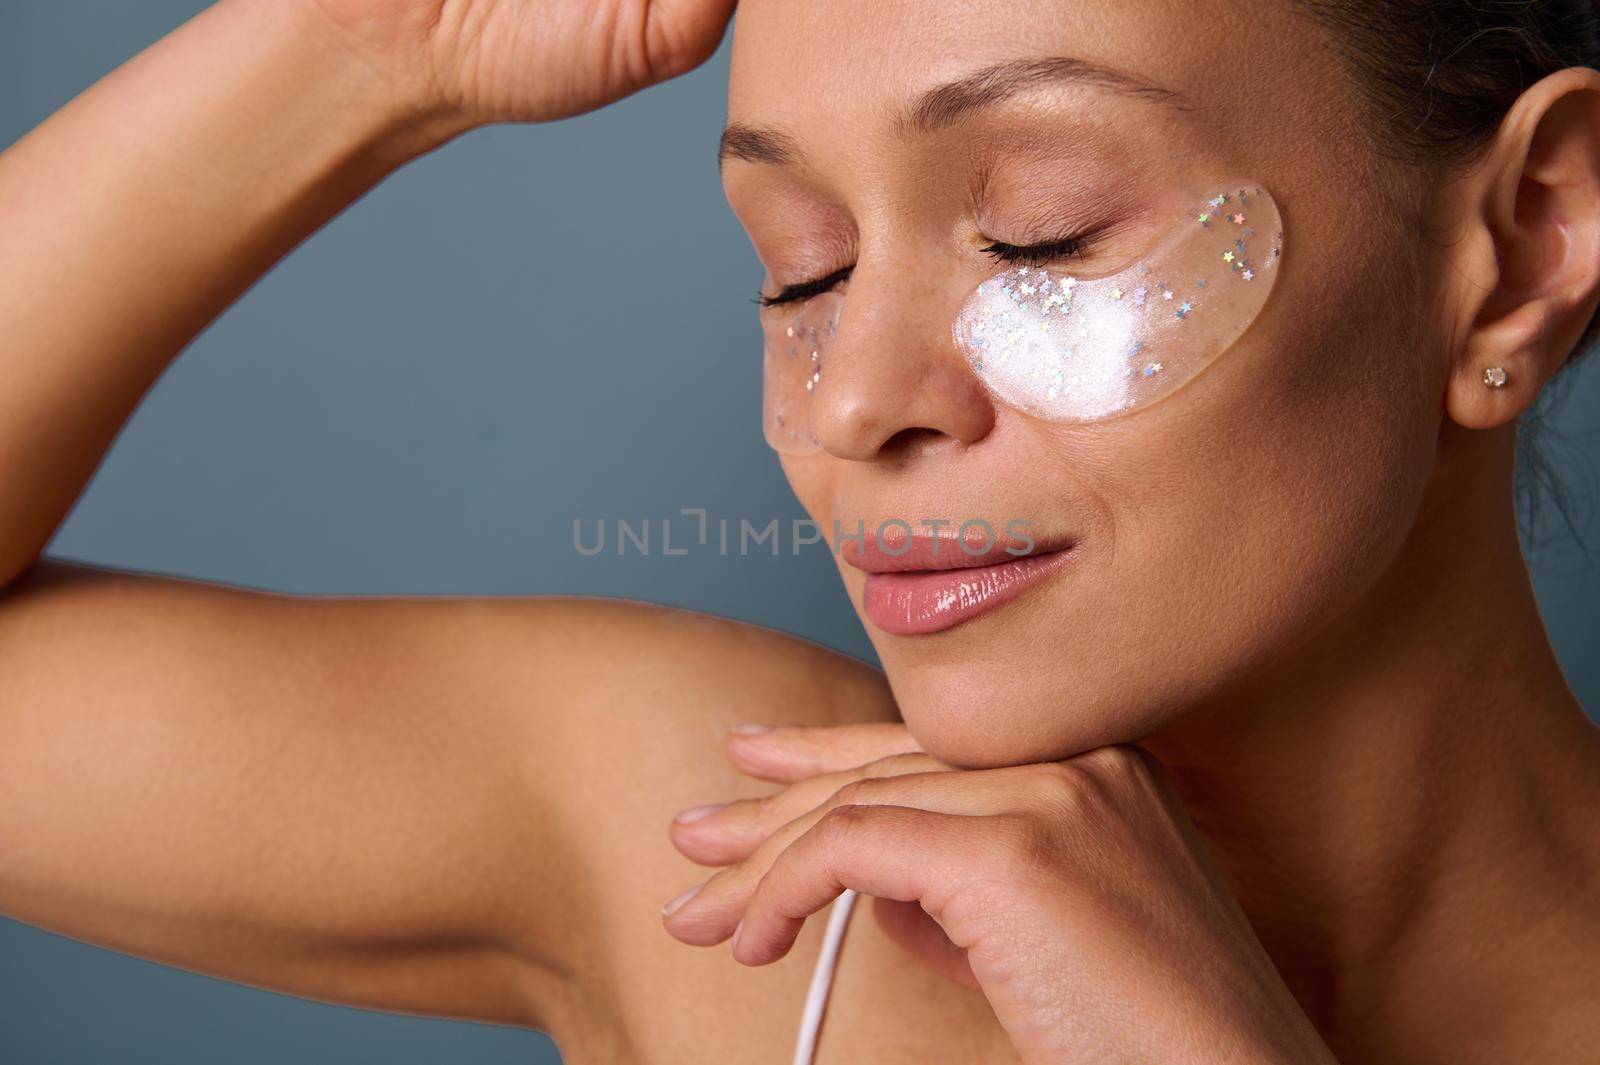 Head shot of a young beautiful woman with perfect glowing skin and natural makeup posing for the camera with medical collagen patches under her eyes to reduce fatigue and puffiness. Skin care concept by artgf